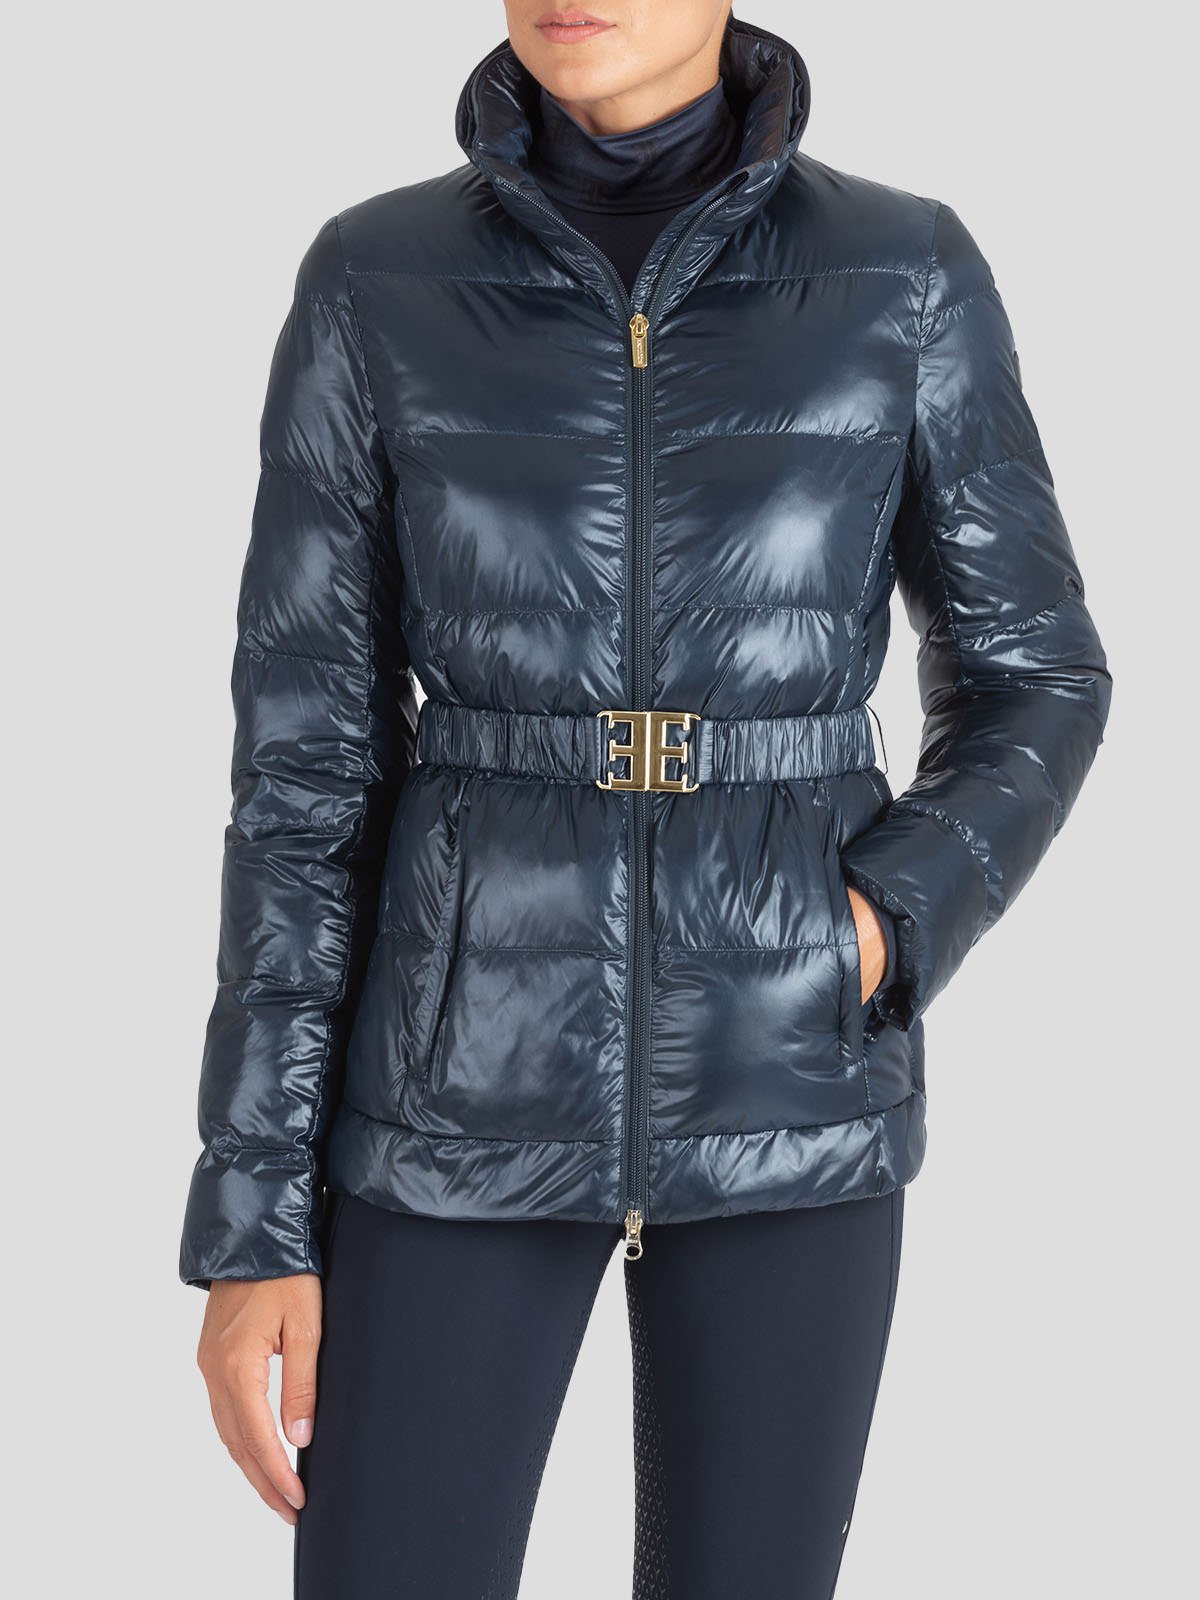 ELMAE WOMEN'S PADDED JACKET - front view- blue